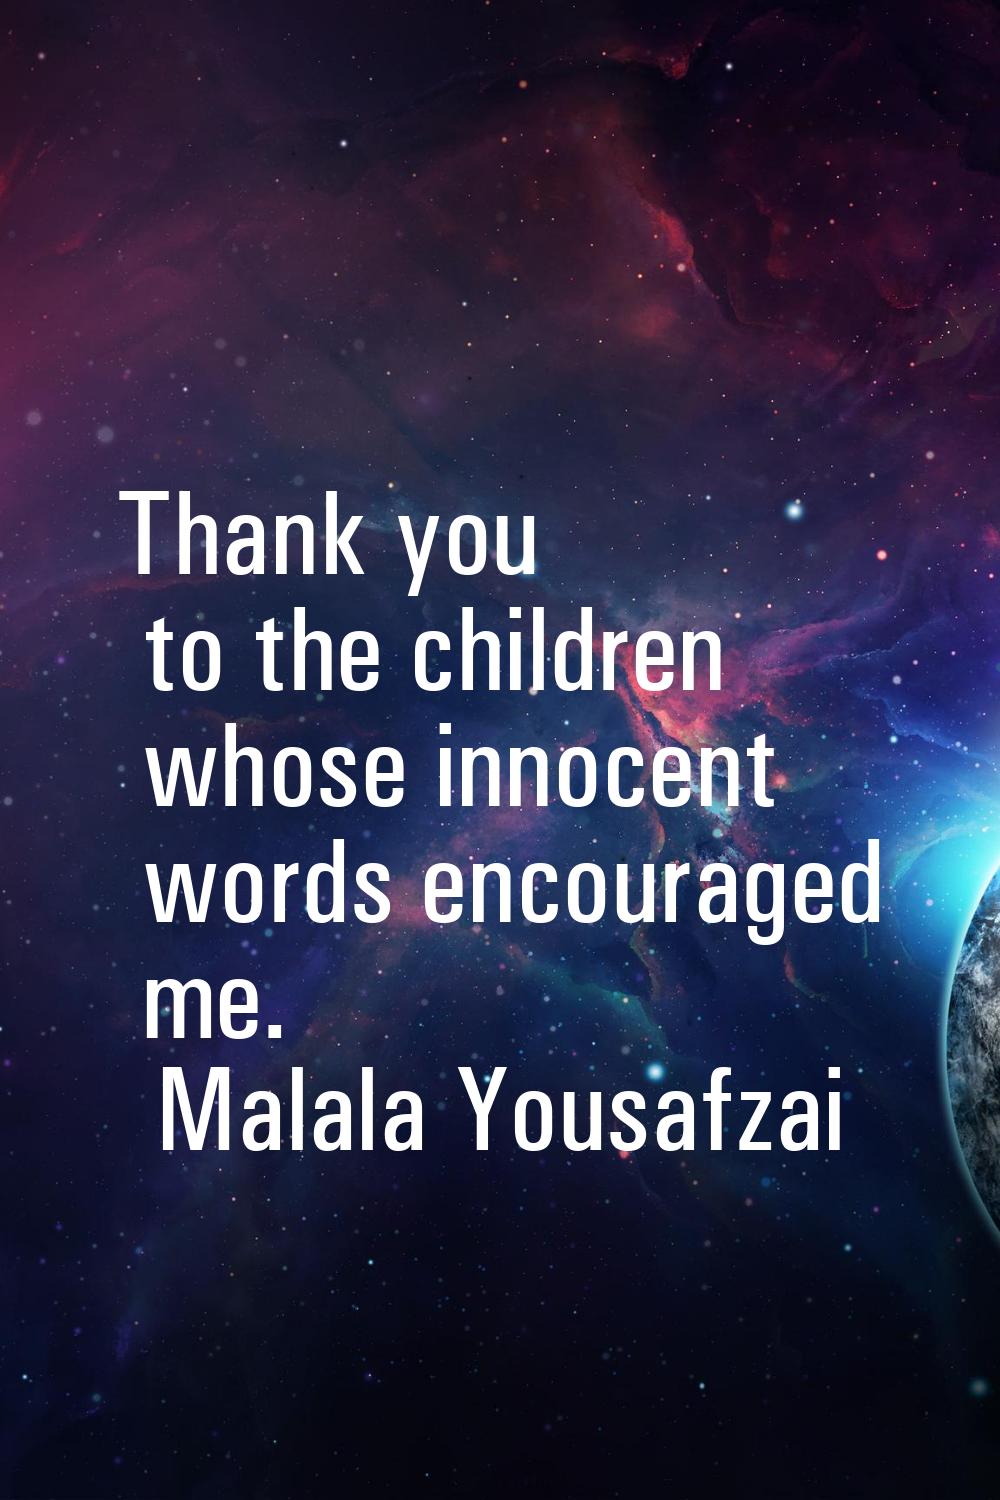 Thank you to the children whose innocent words encouraged me.